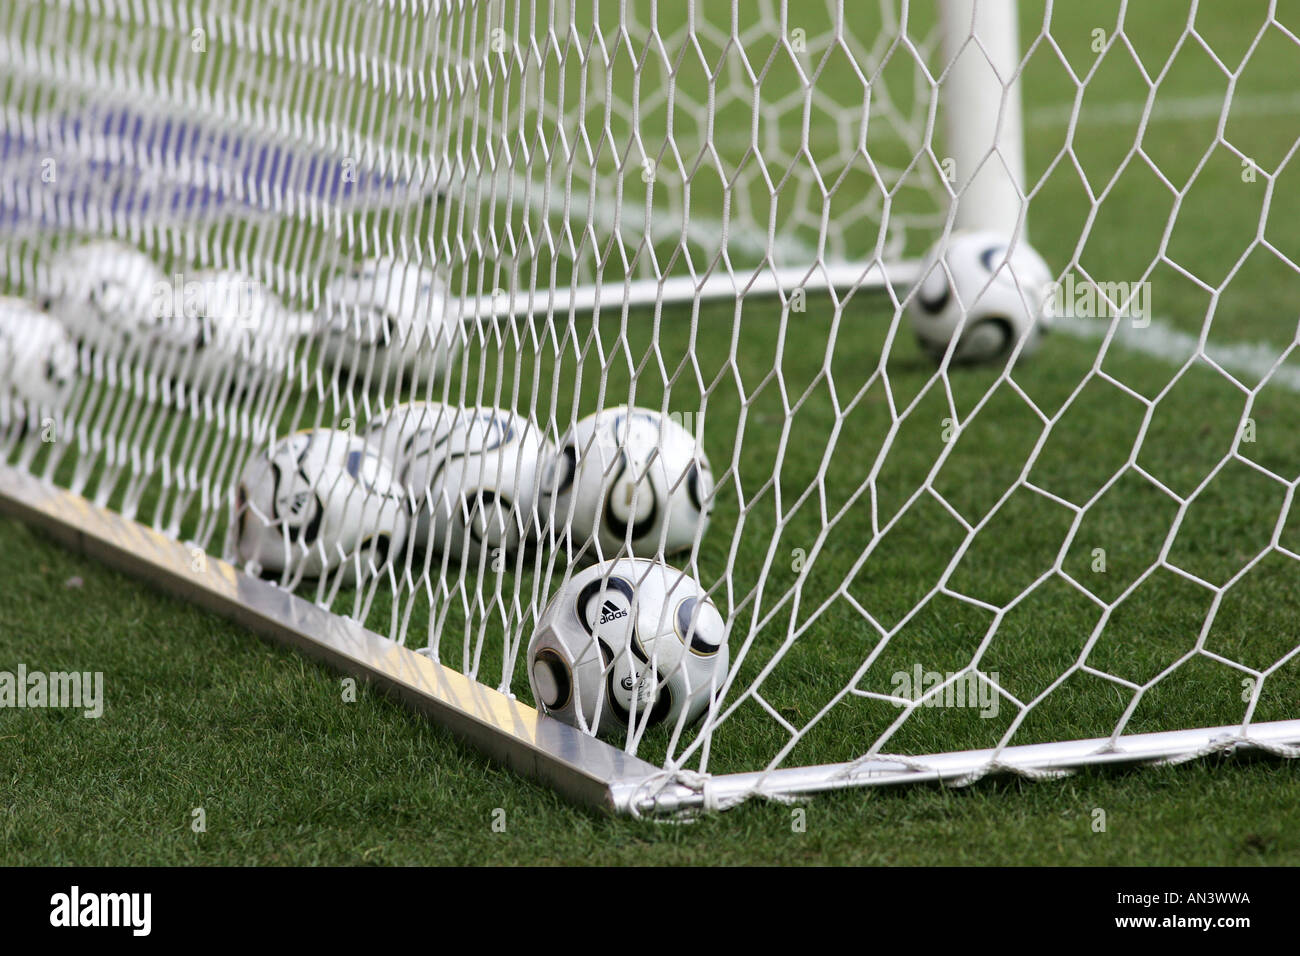 Soccer Balls In The Net Of A Goal Stock Photo Alamy